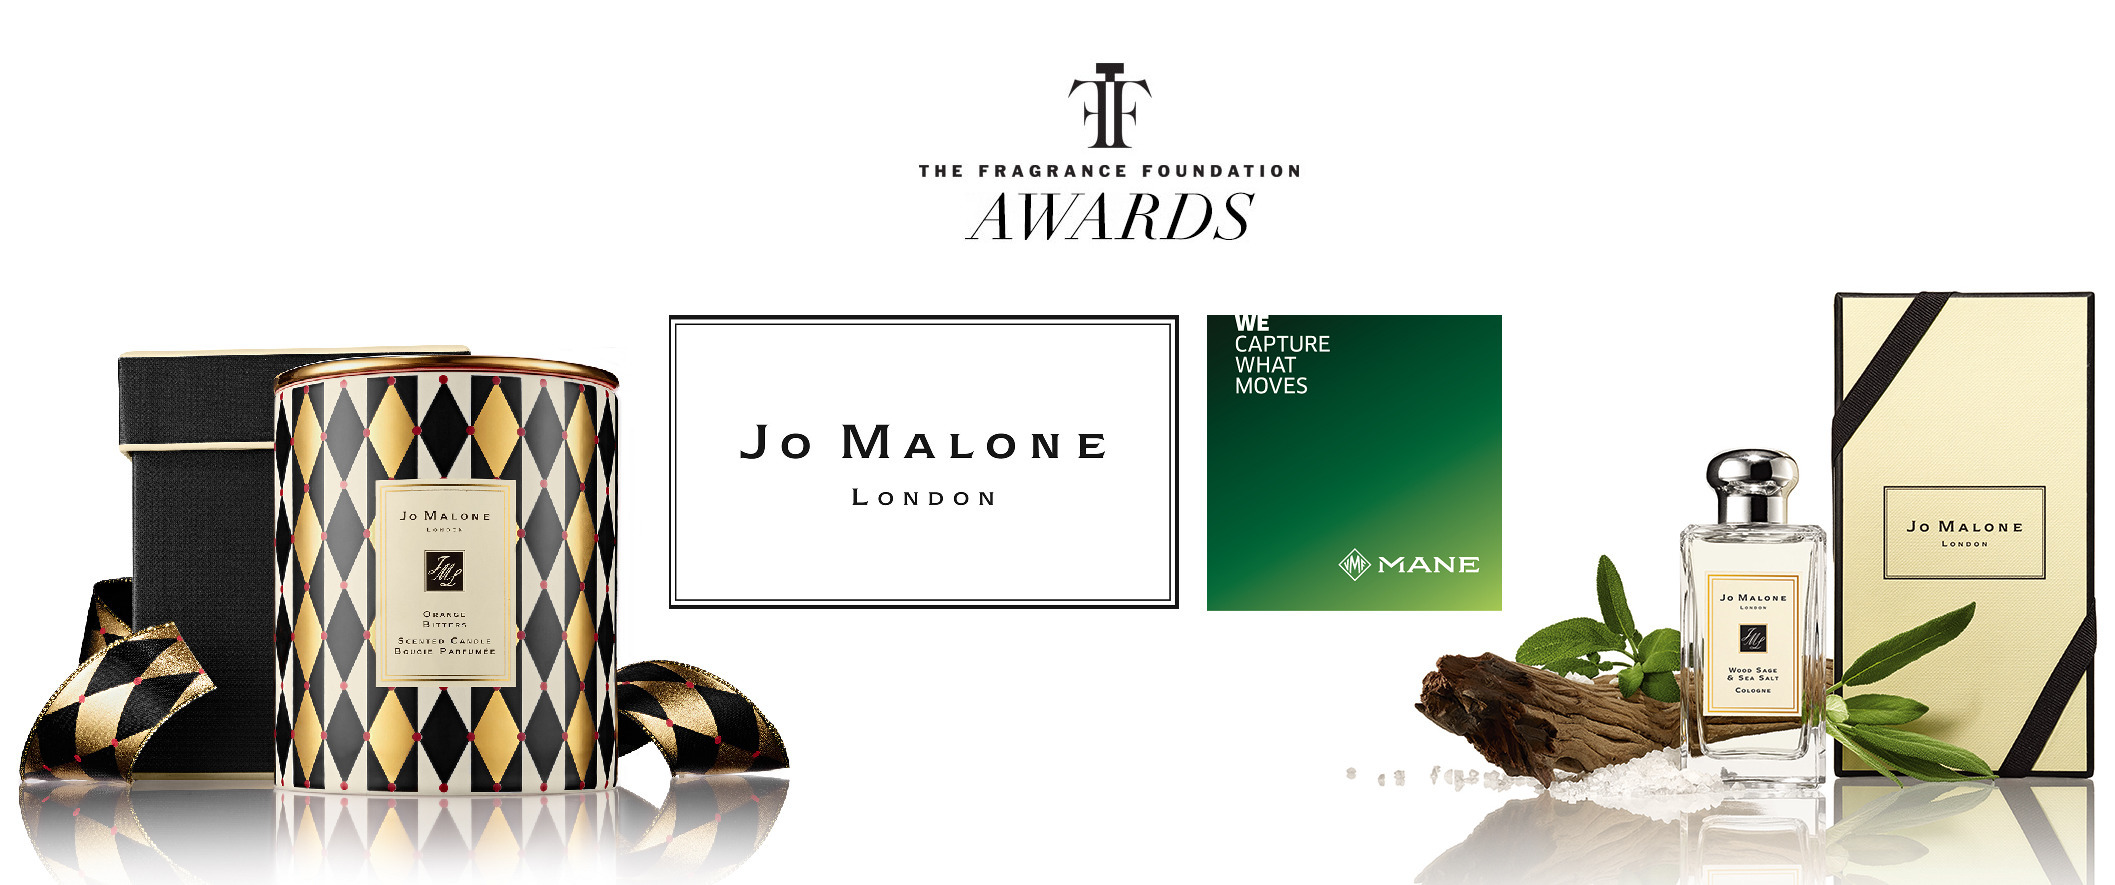 Two Fragrance Foundation Awards for MANE and Jo